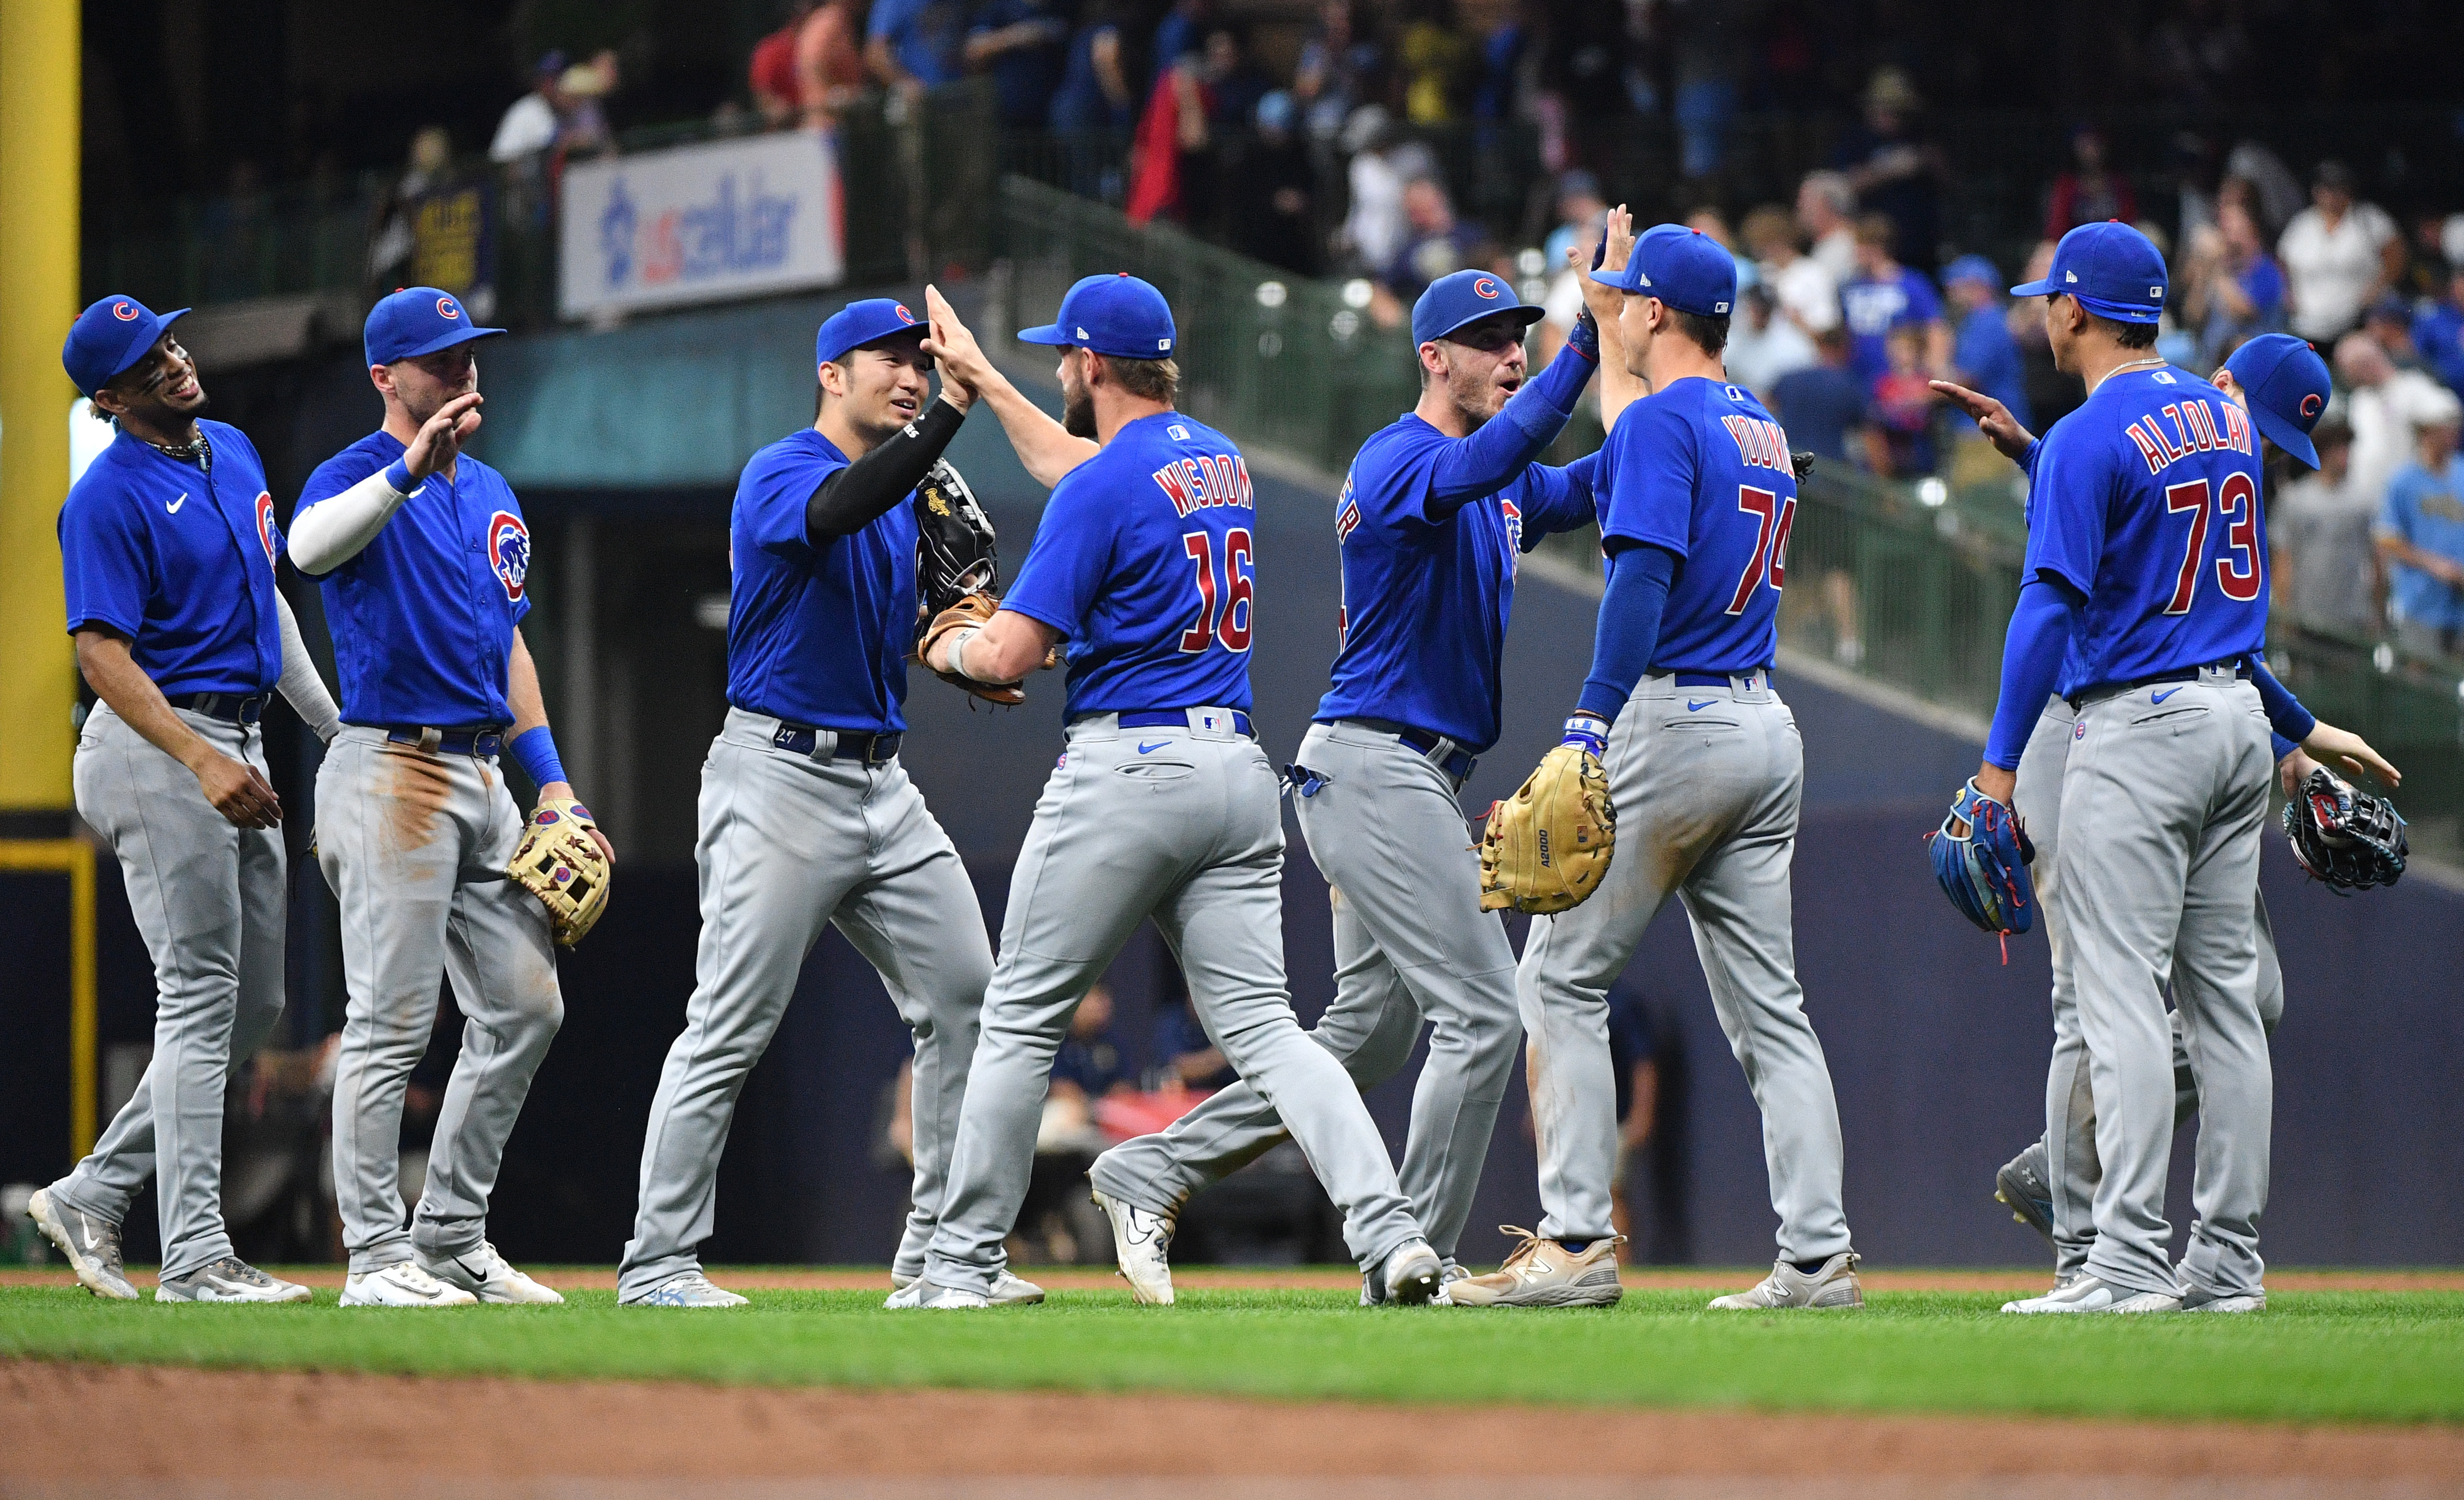 MLB: Chicago Cubs at Milwaukee Brewers, Fieldlevel